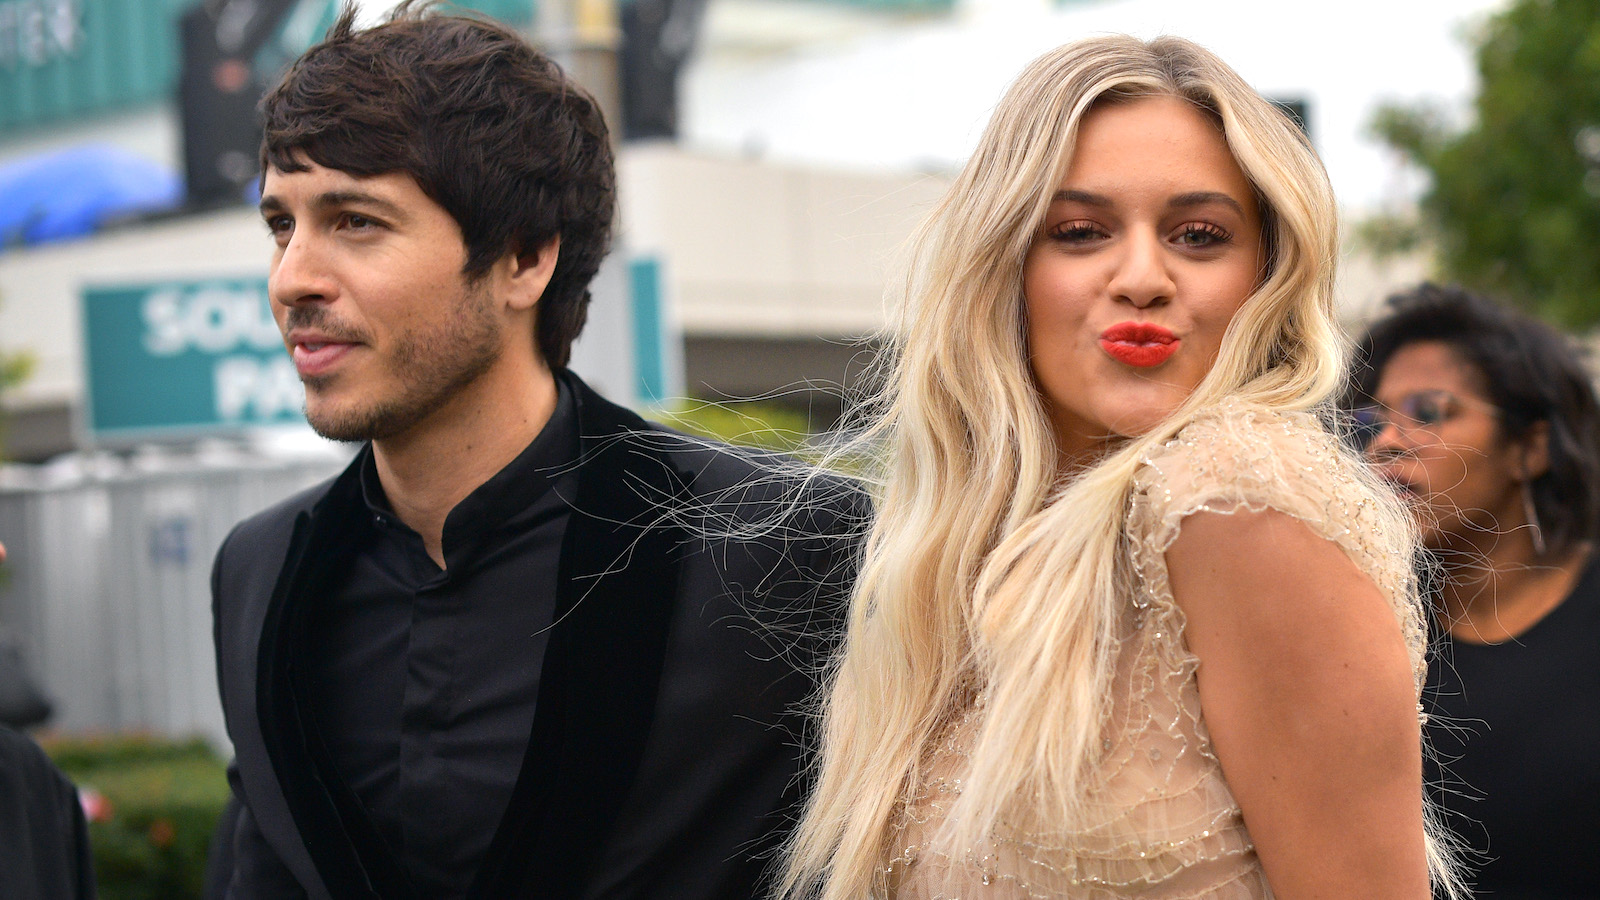 (L) Morgan Evans looking away from the camera in a dark suit and (R) Kelsea Ballerini blowing a kiss at the camera with red lipstick and a tan dress